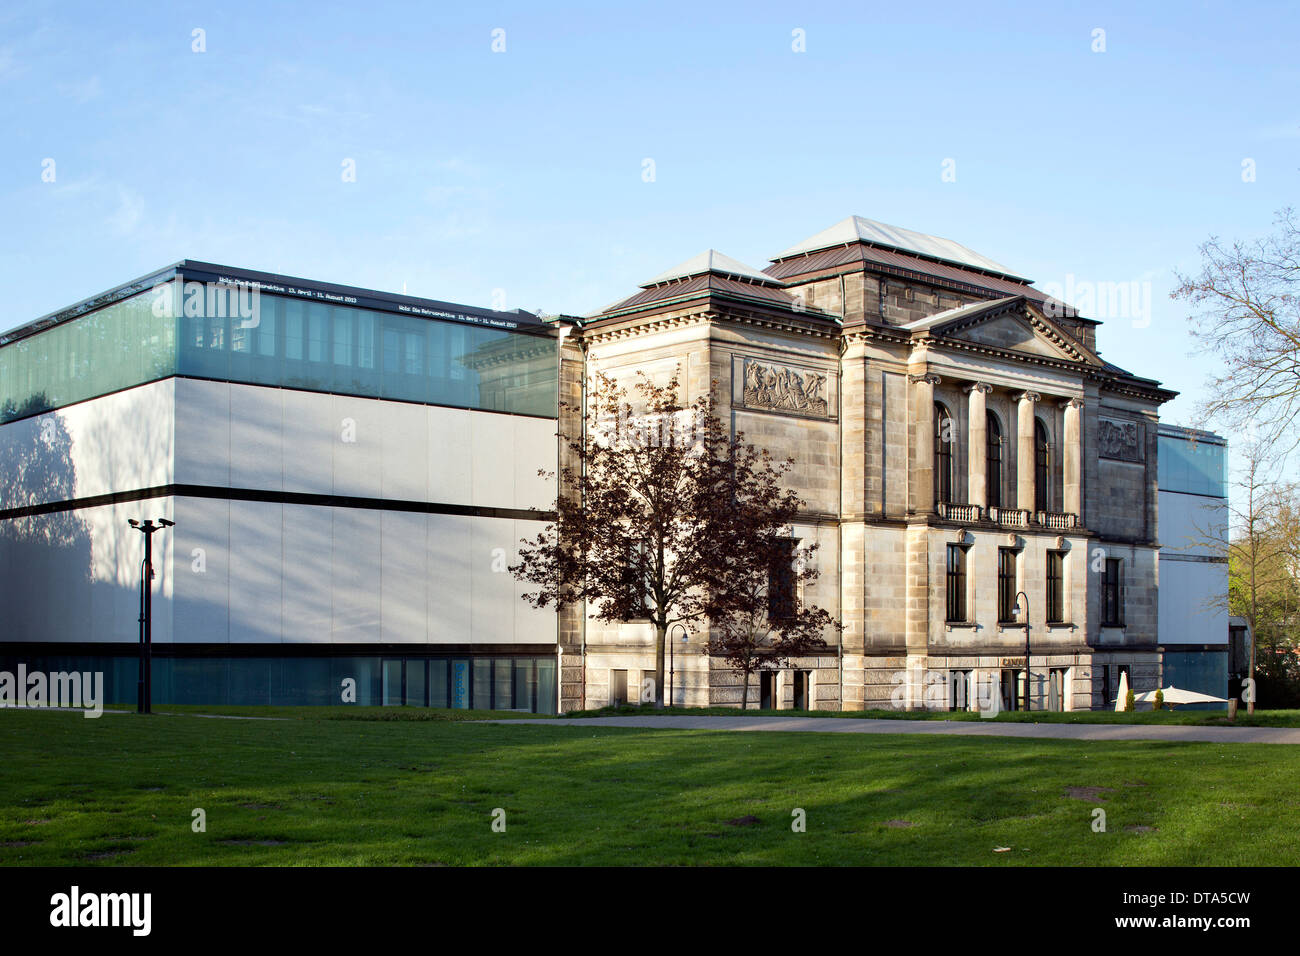 Kunsthalle Bremen art gallery with an extension building, Bremen, Germany Stock Photo